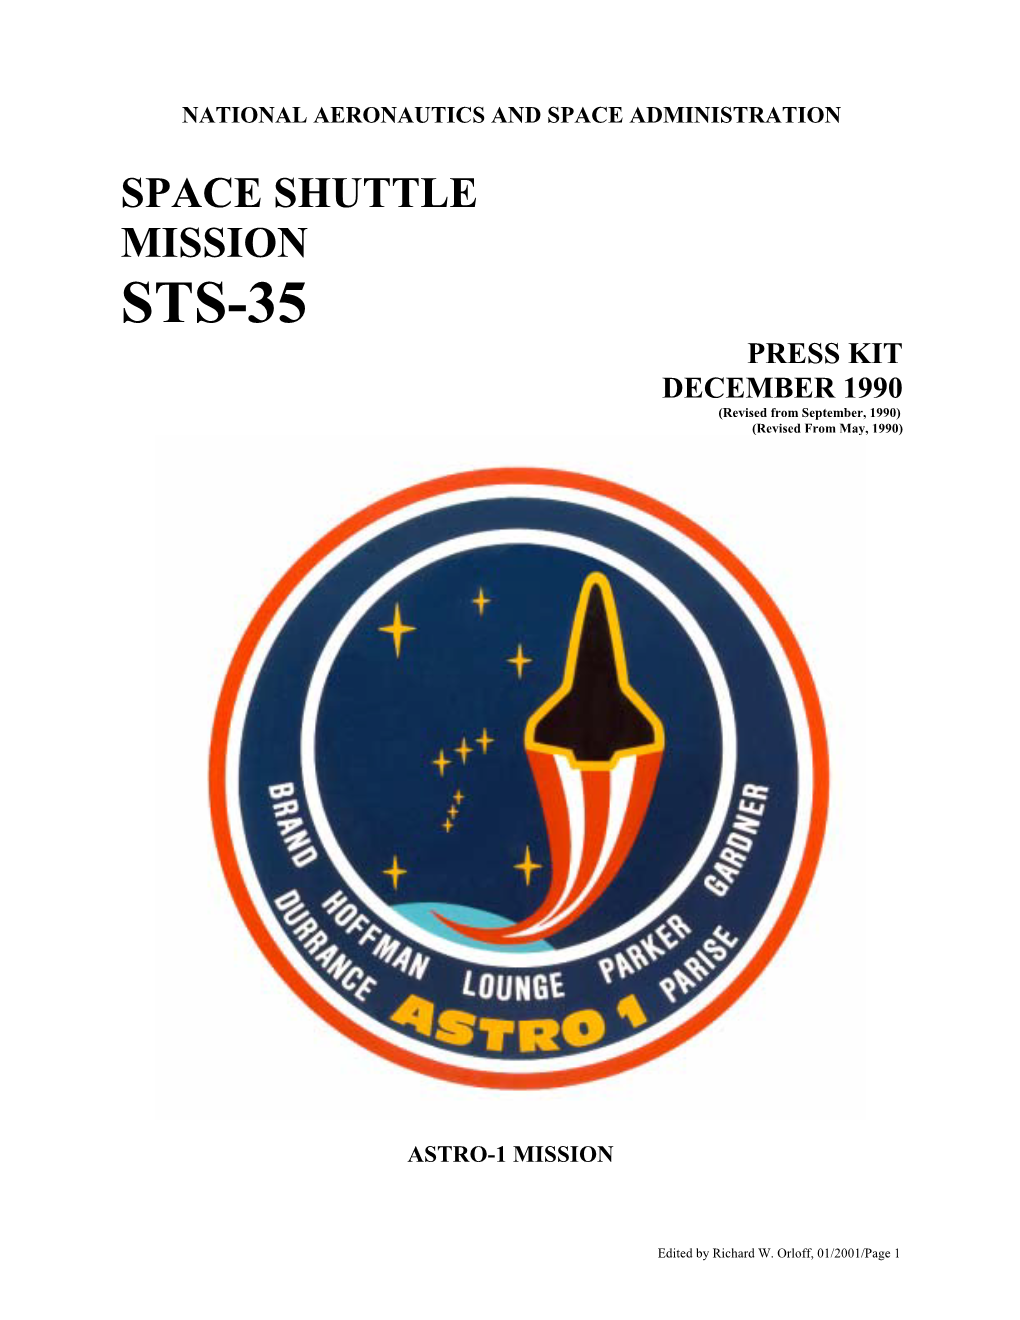 STS-35 PRESS KIT DECEMBER 1990 (Revised from September, 1990) (Revised from May, 1990)